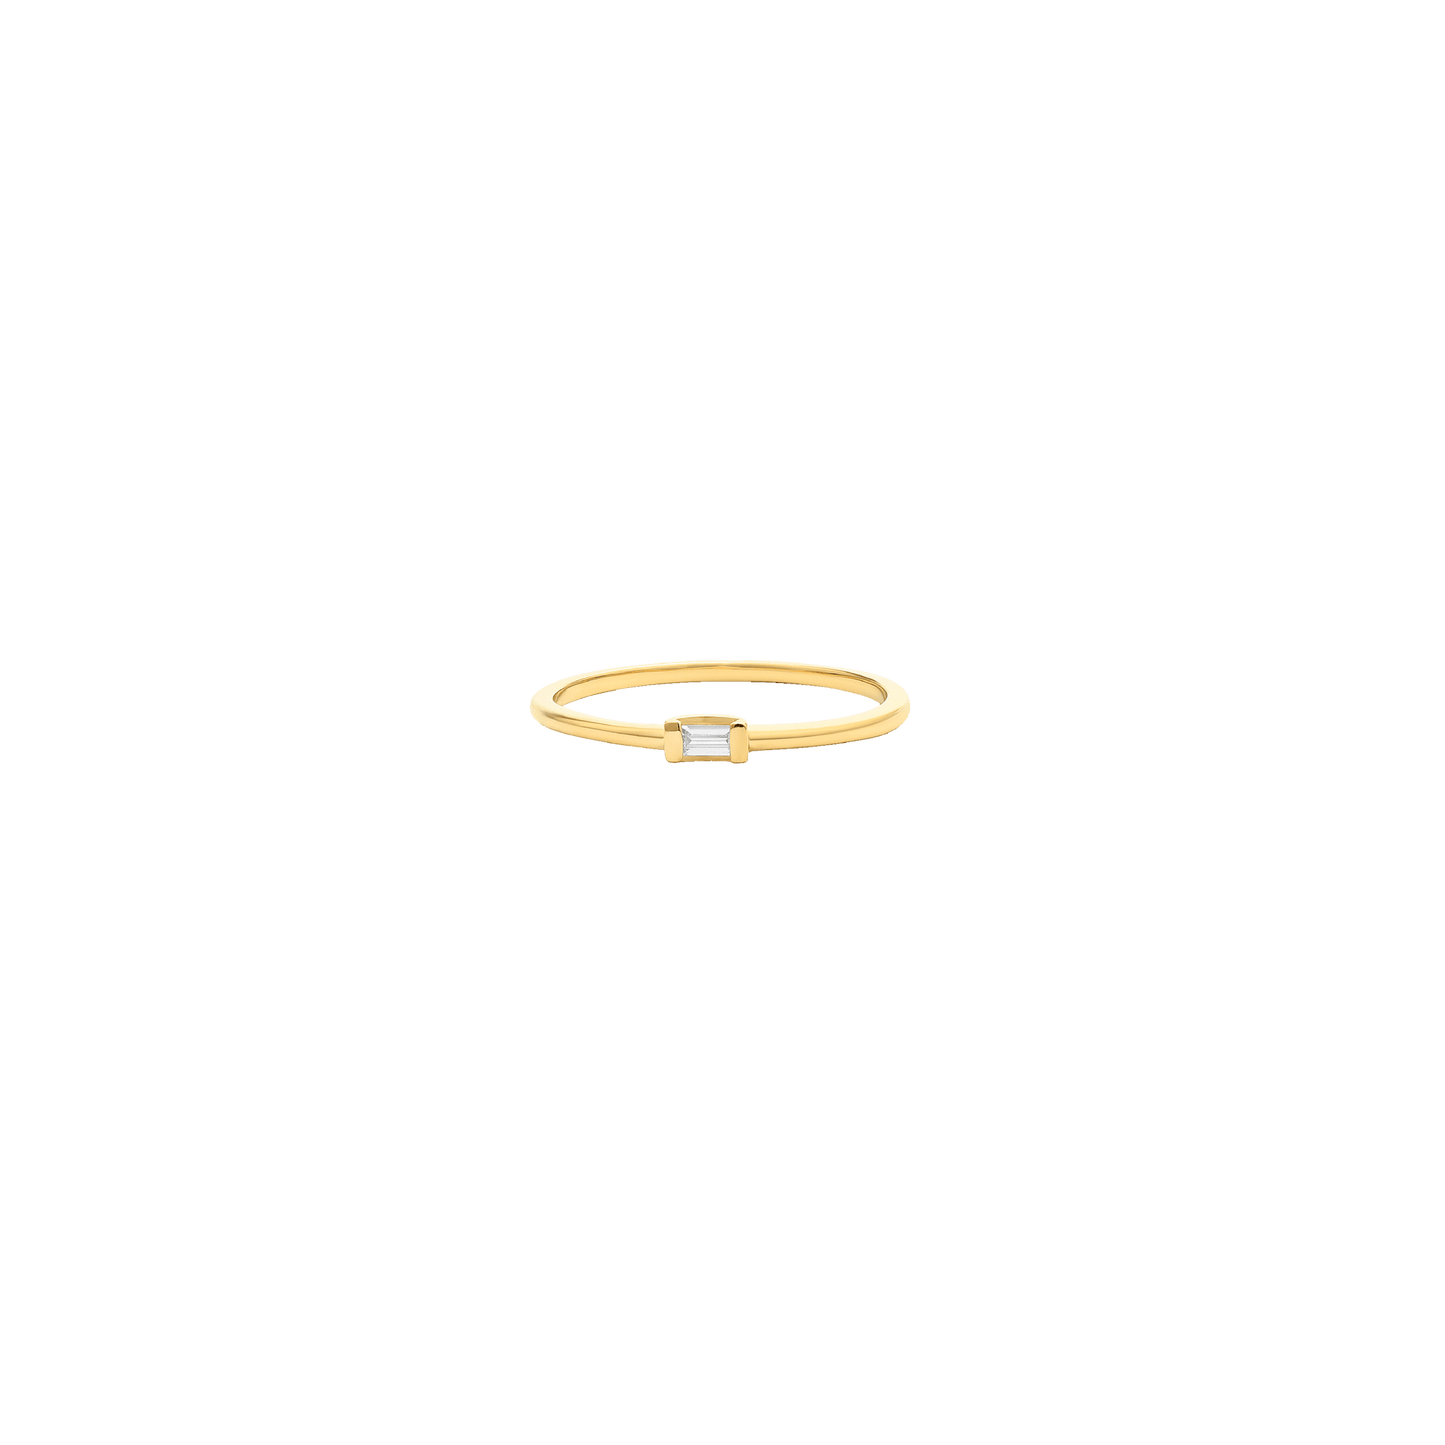 Single Diamond Baguette Ring - 14K Yellow Gold Rings 14K Solid Gold US 4 